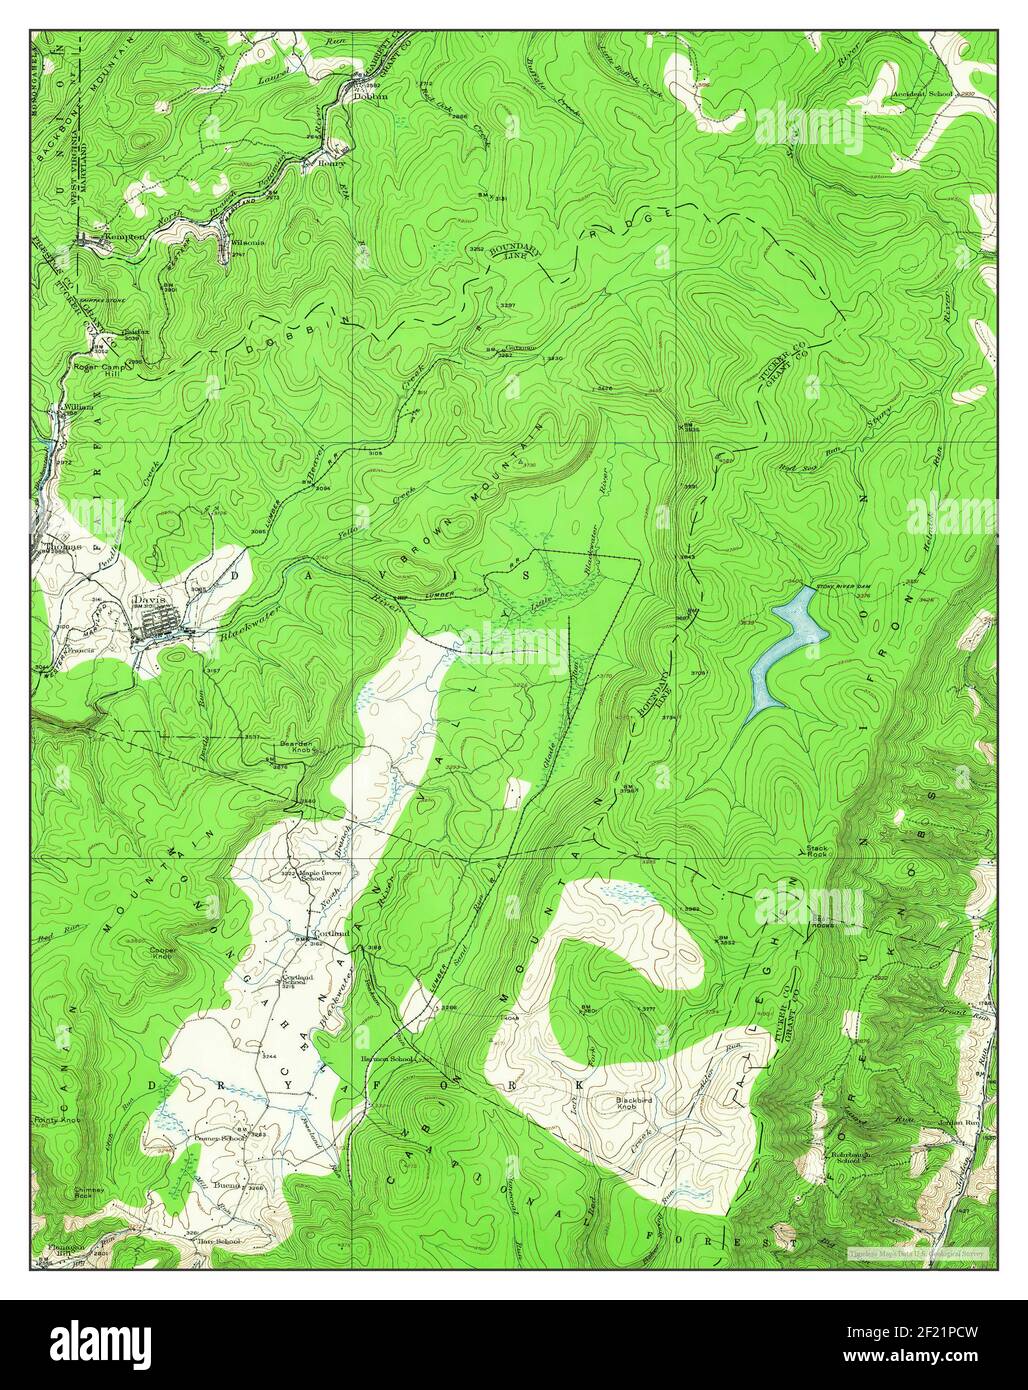 Davis, West Virginia, map 1919, 1:62500, United States of America by Timeless Maps, data U.S. Geological Survey Stock Photo